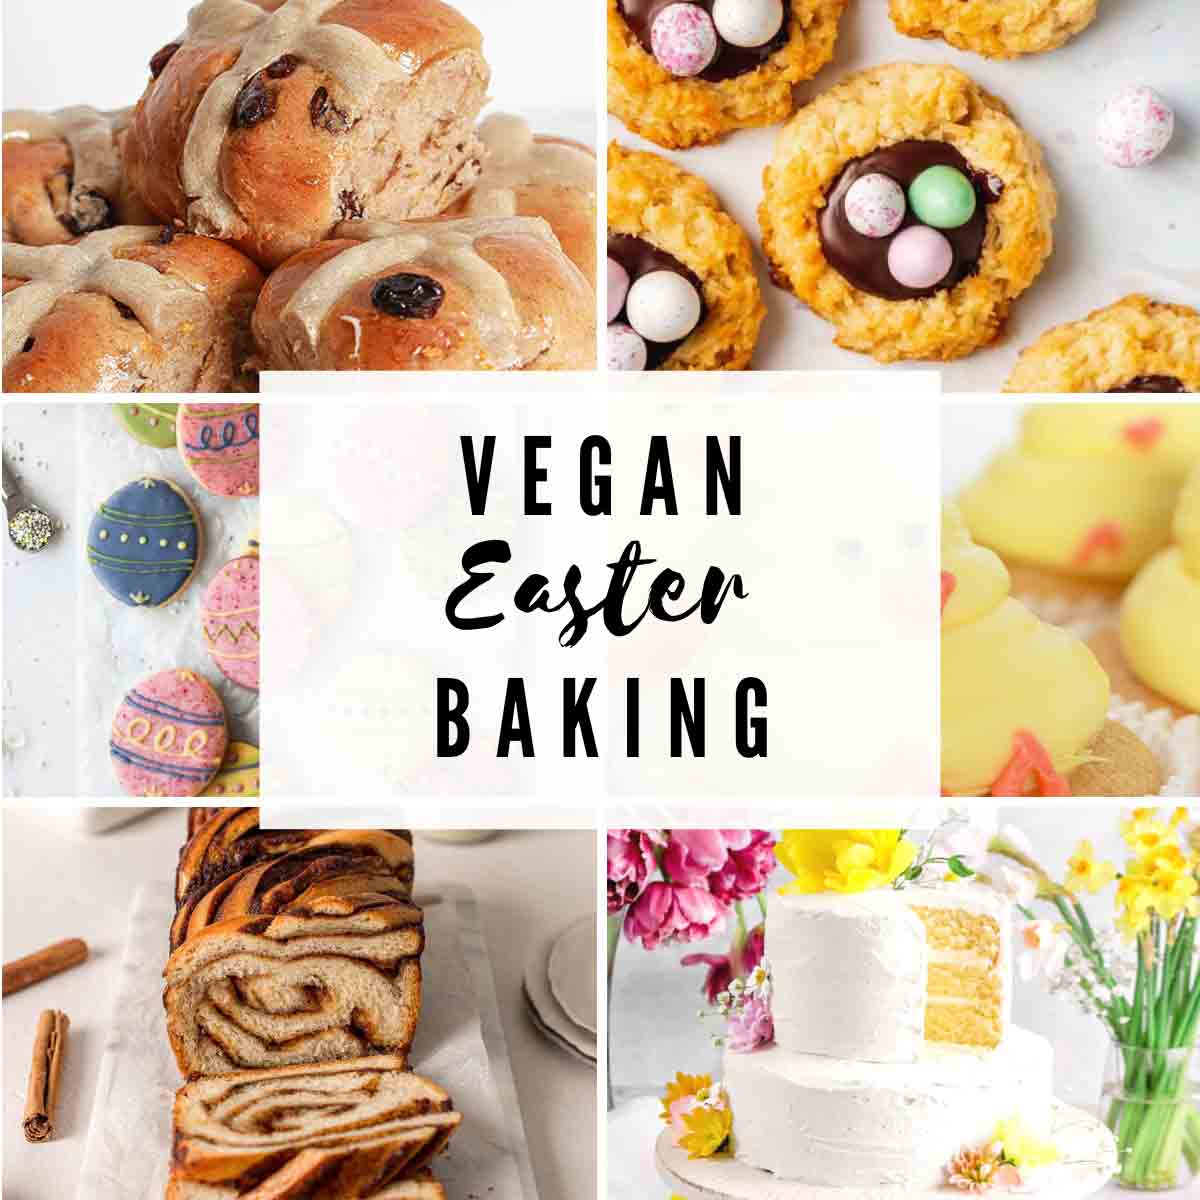 Vegan Easter Baking Images With Text Overlay